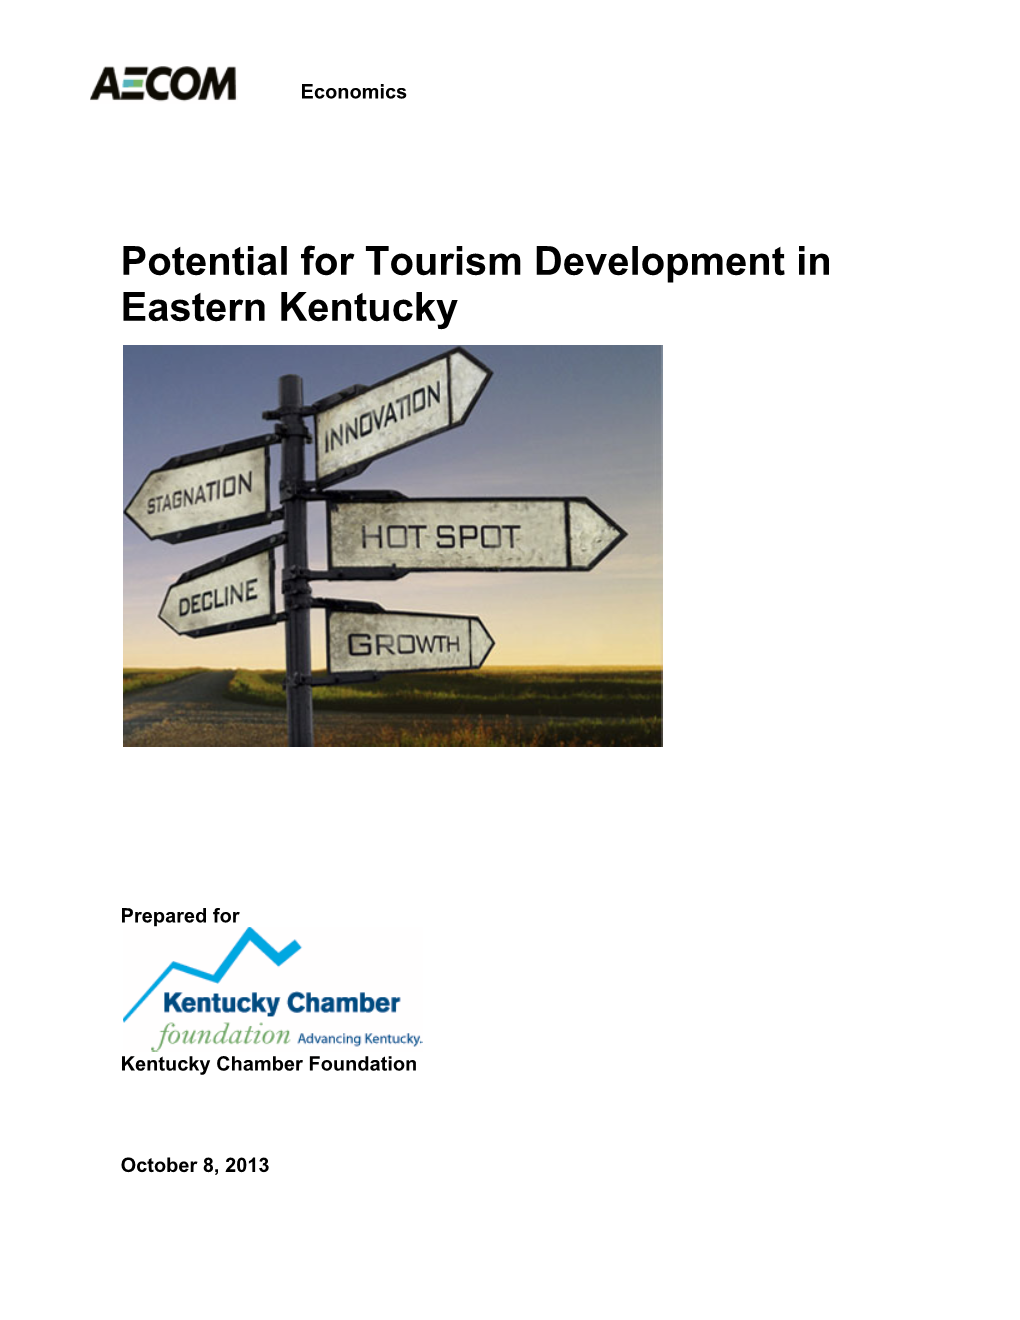 Potential for Tourism Development in Eastern Kentucky